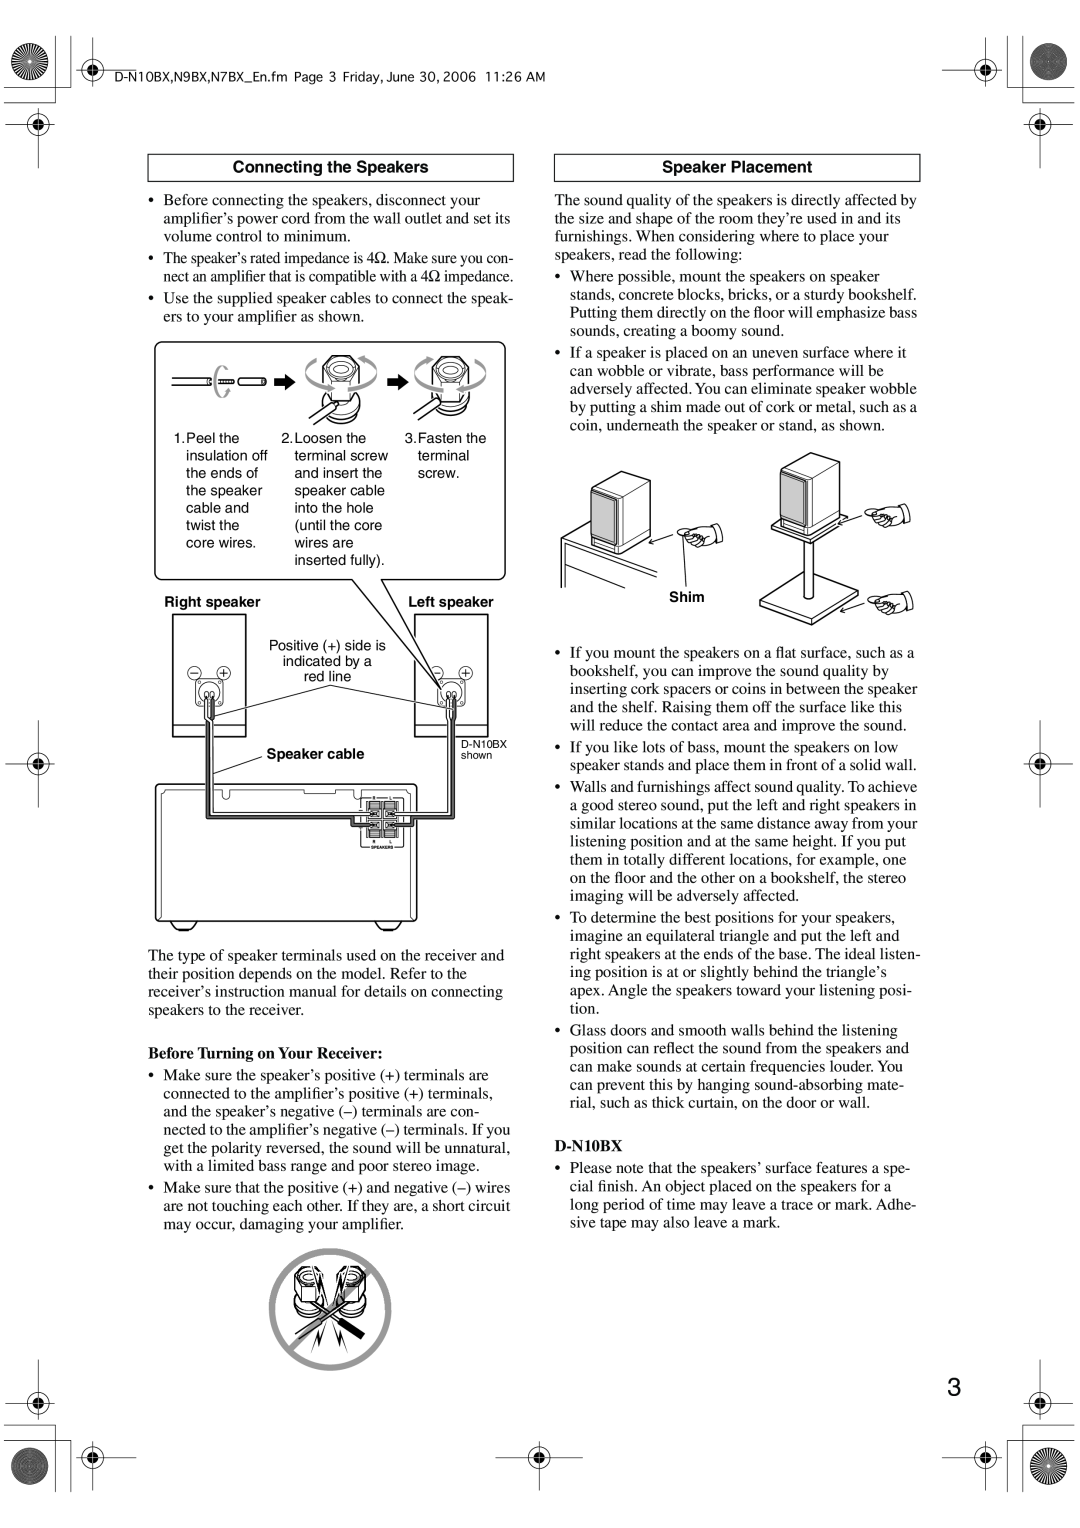 Onkyo D-N9BX, D-N7BX instruction manual Connecting the Speakers, Before Turning on Your Receiver, Speaker Placement, D-N10BX 